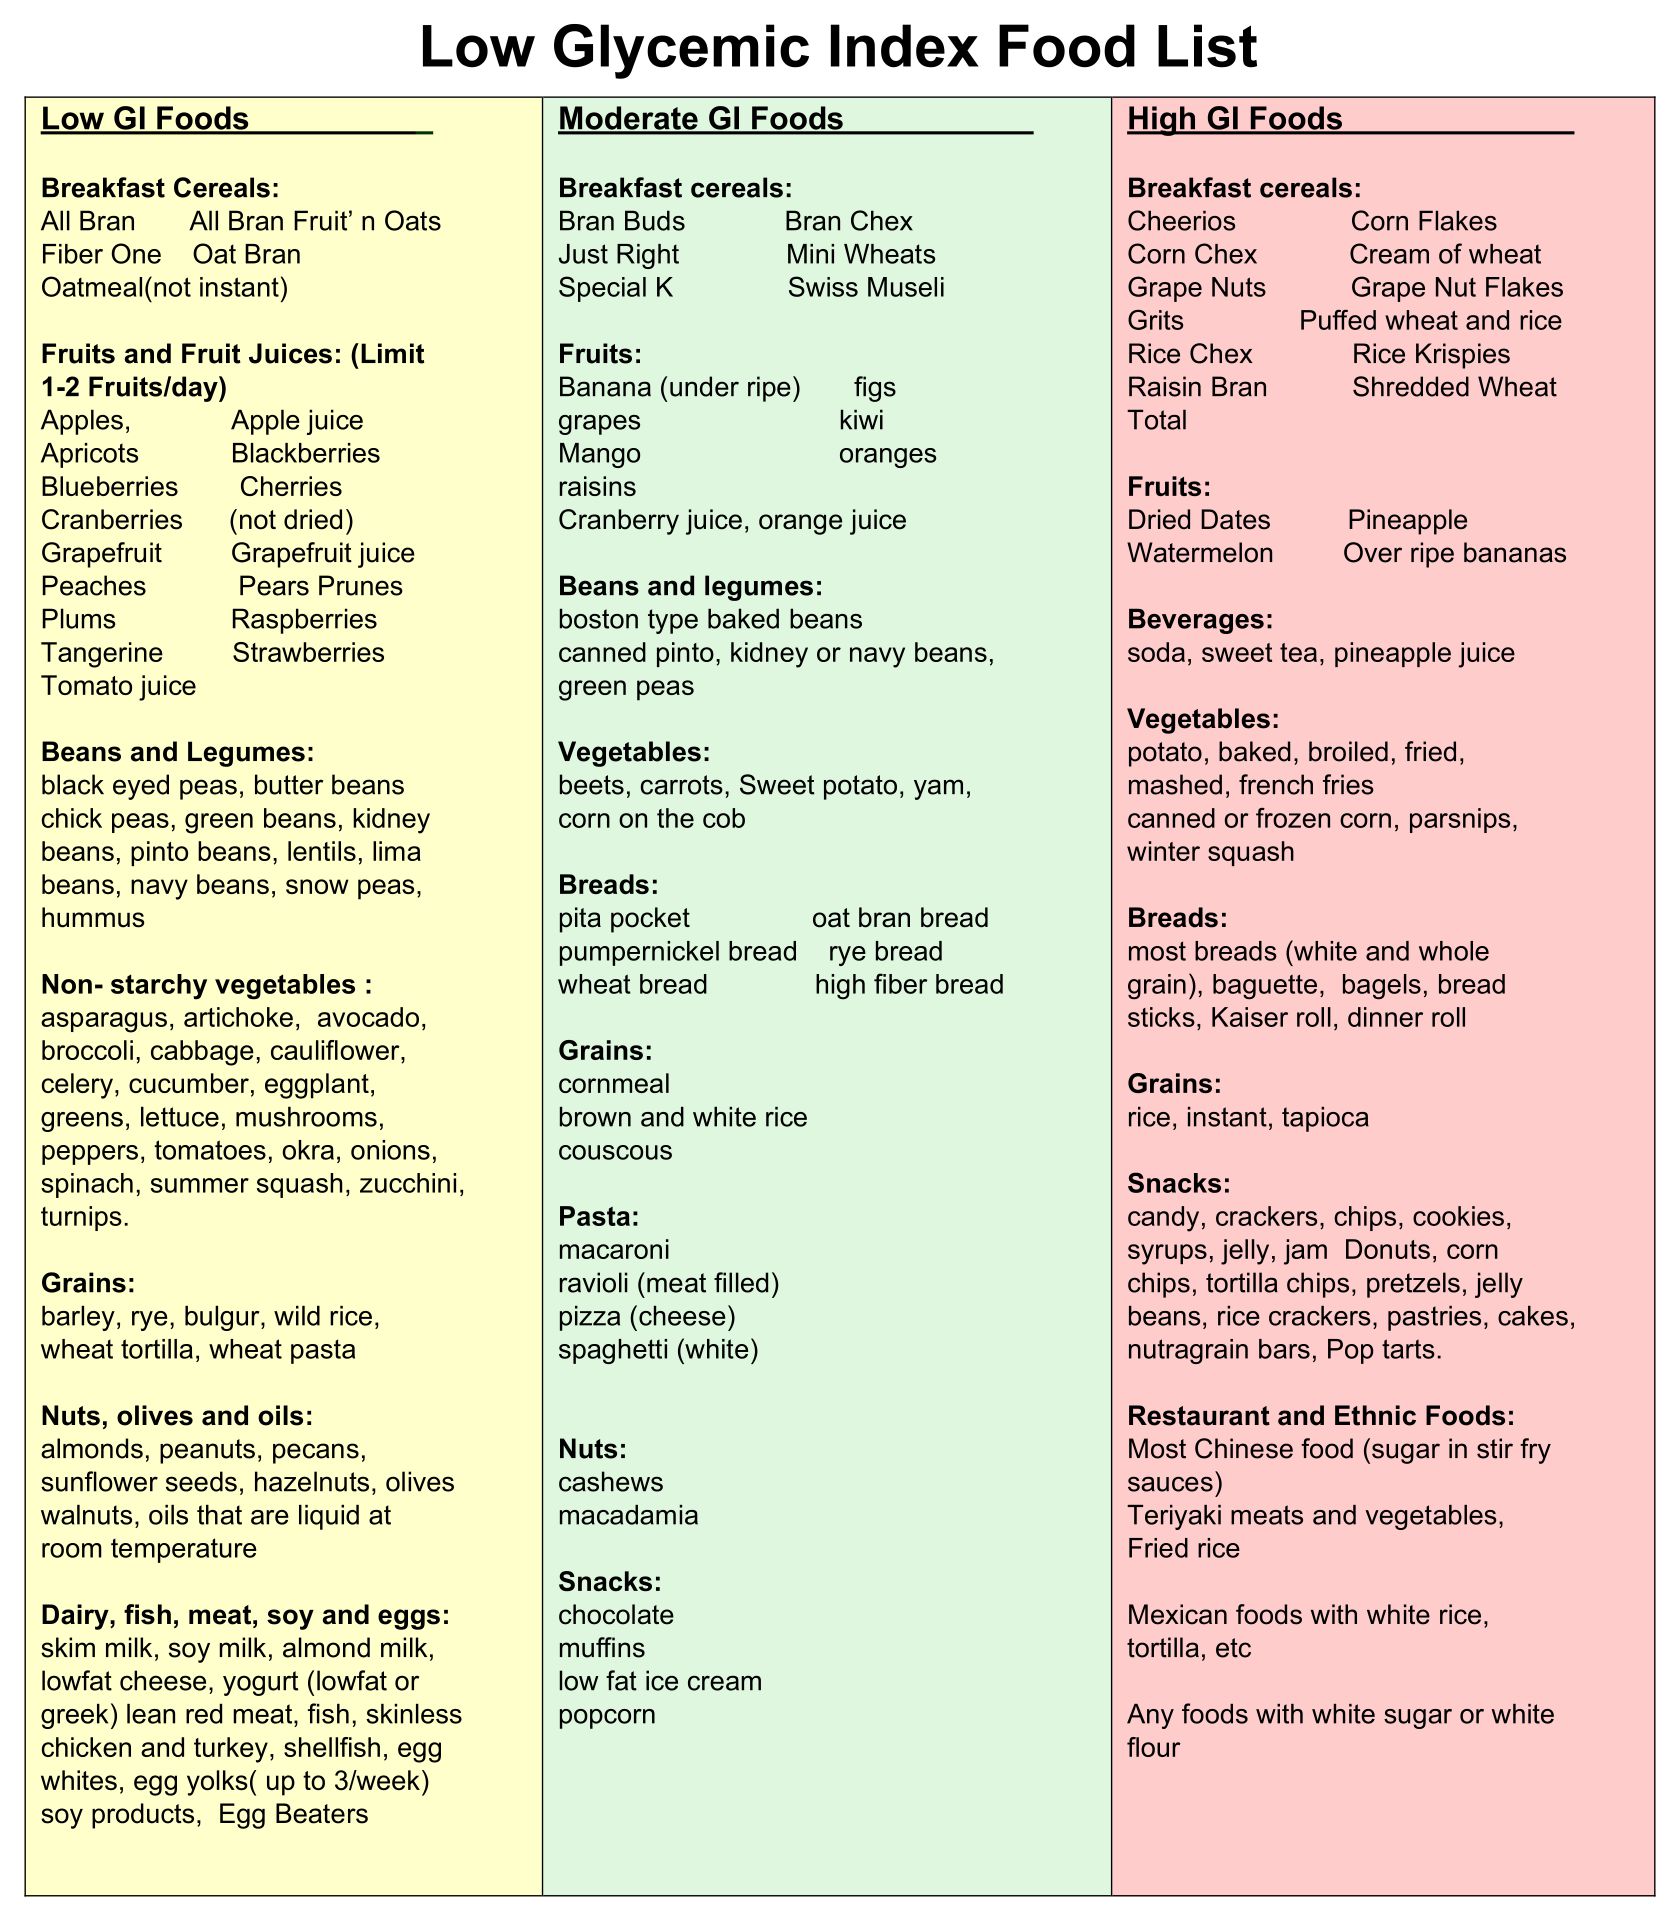 6 Best Images of Printable Low Glycemic Food Chart Low Glycemic Index